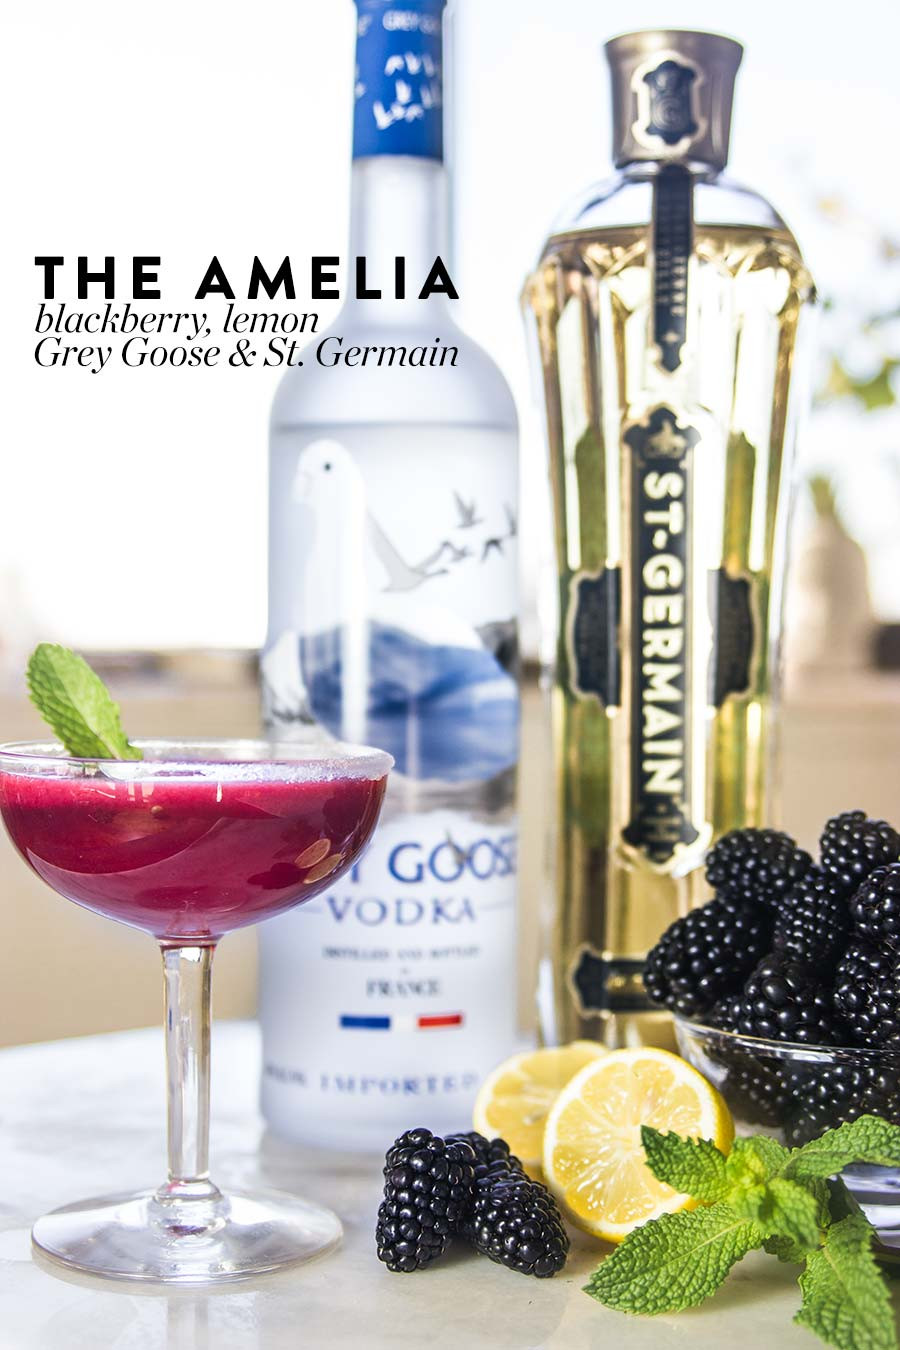 Cocktail Drinks With Vodka
 The Amelia Blackberry & Vodka Cocktail Recipe What’s Cooking